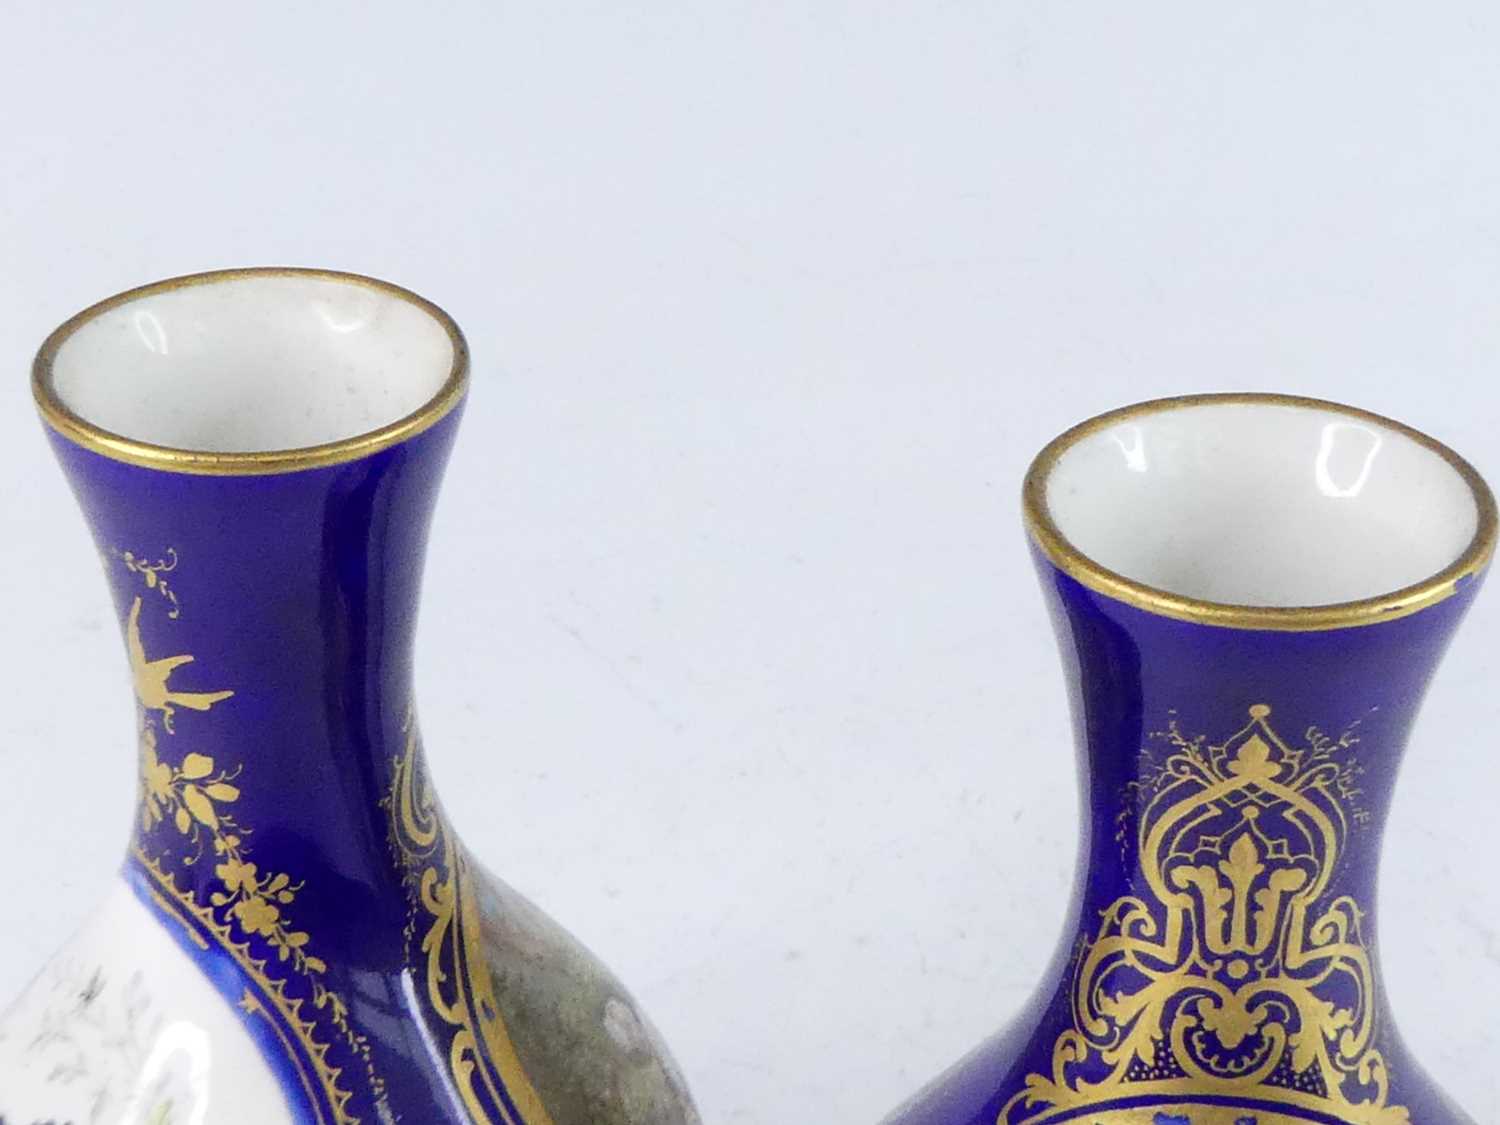 A pair of Sevres porcelain vases, 19th century, each decorated with children in 18th century dress - Image 9 of 9